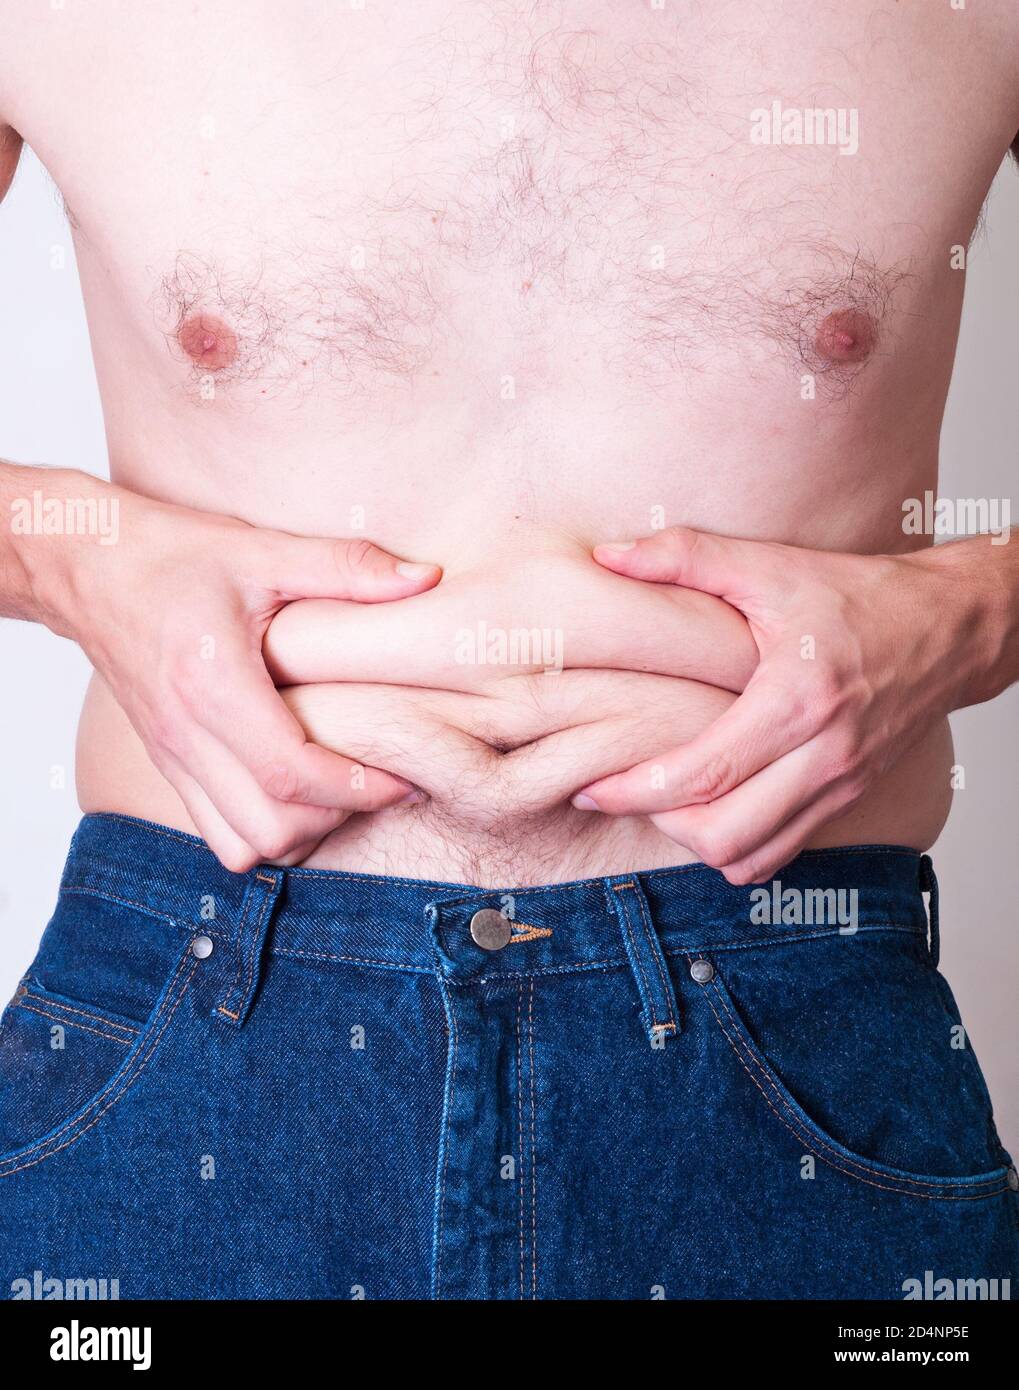 belly of a fat man Stock Photo